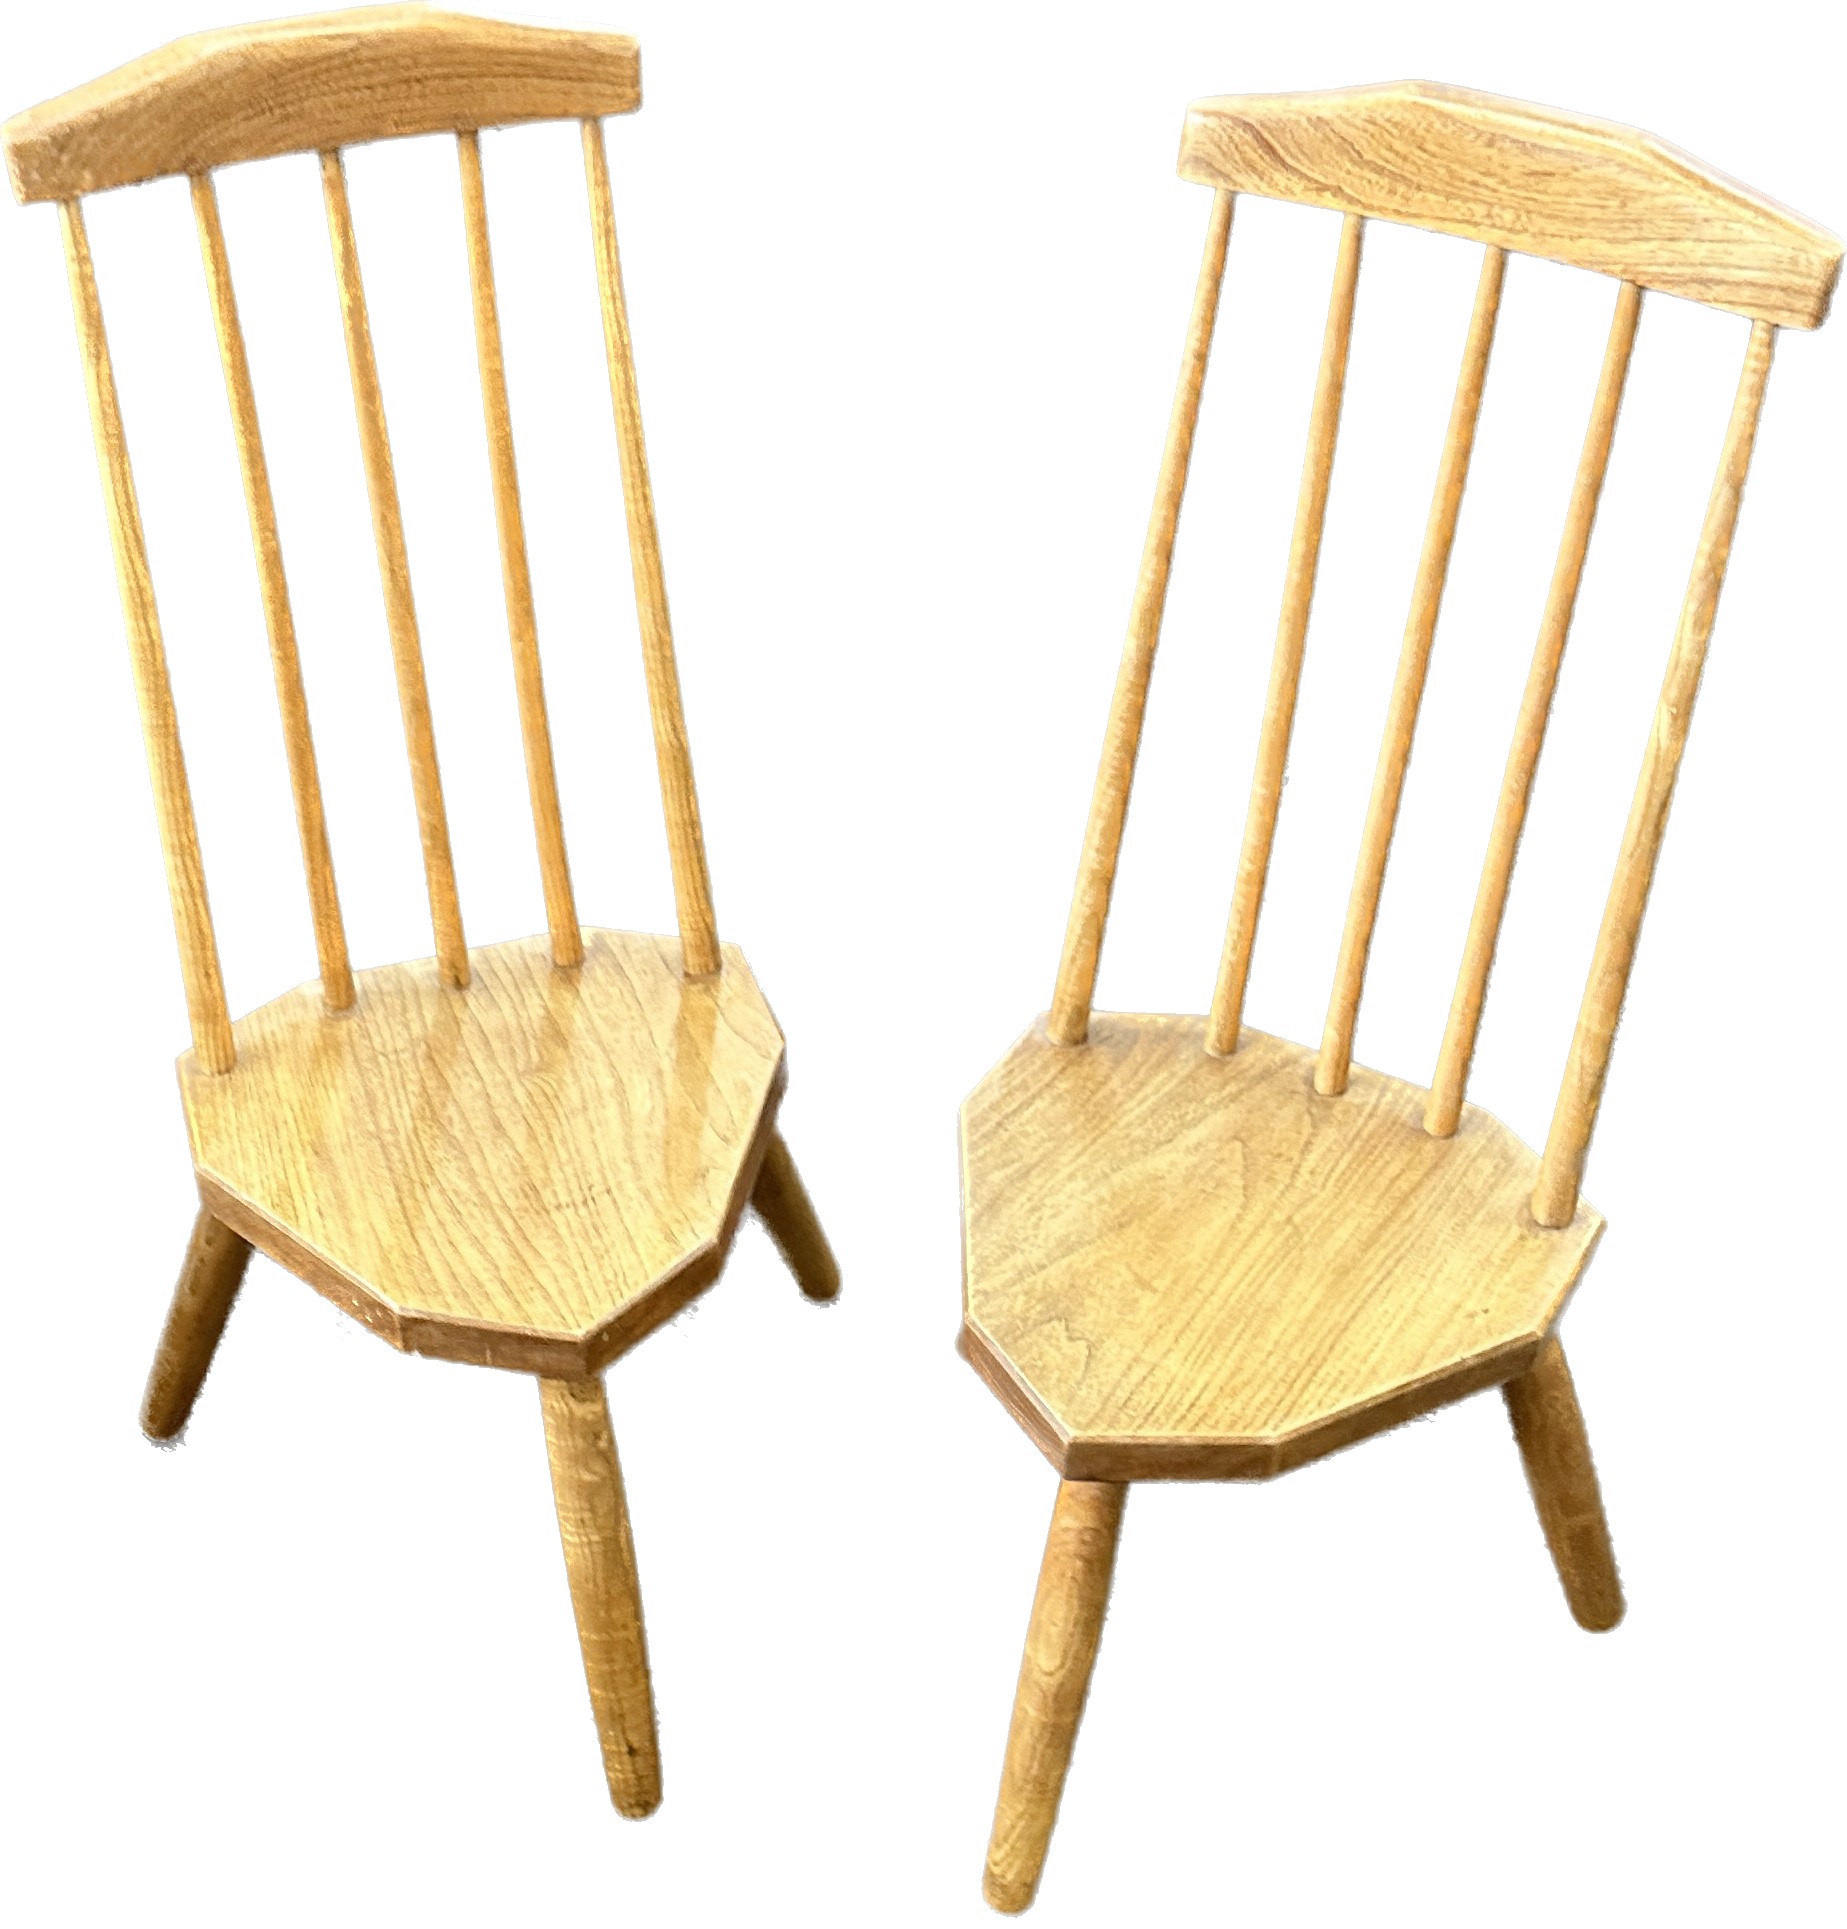 Pair of three legged hall chairs measures approx 31 inches - Image 3 of 3